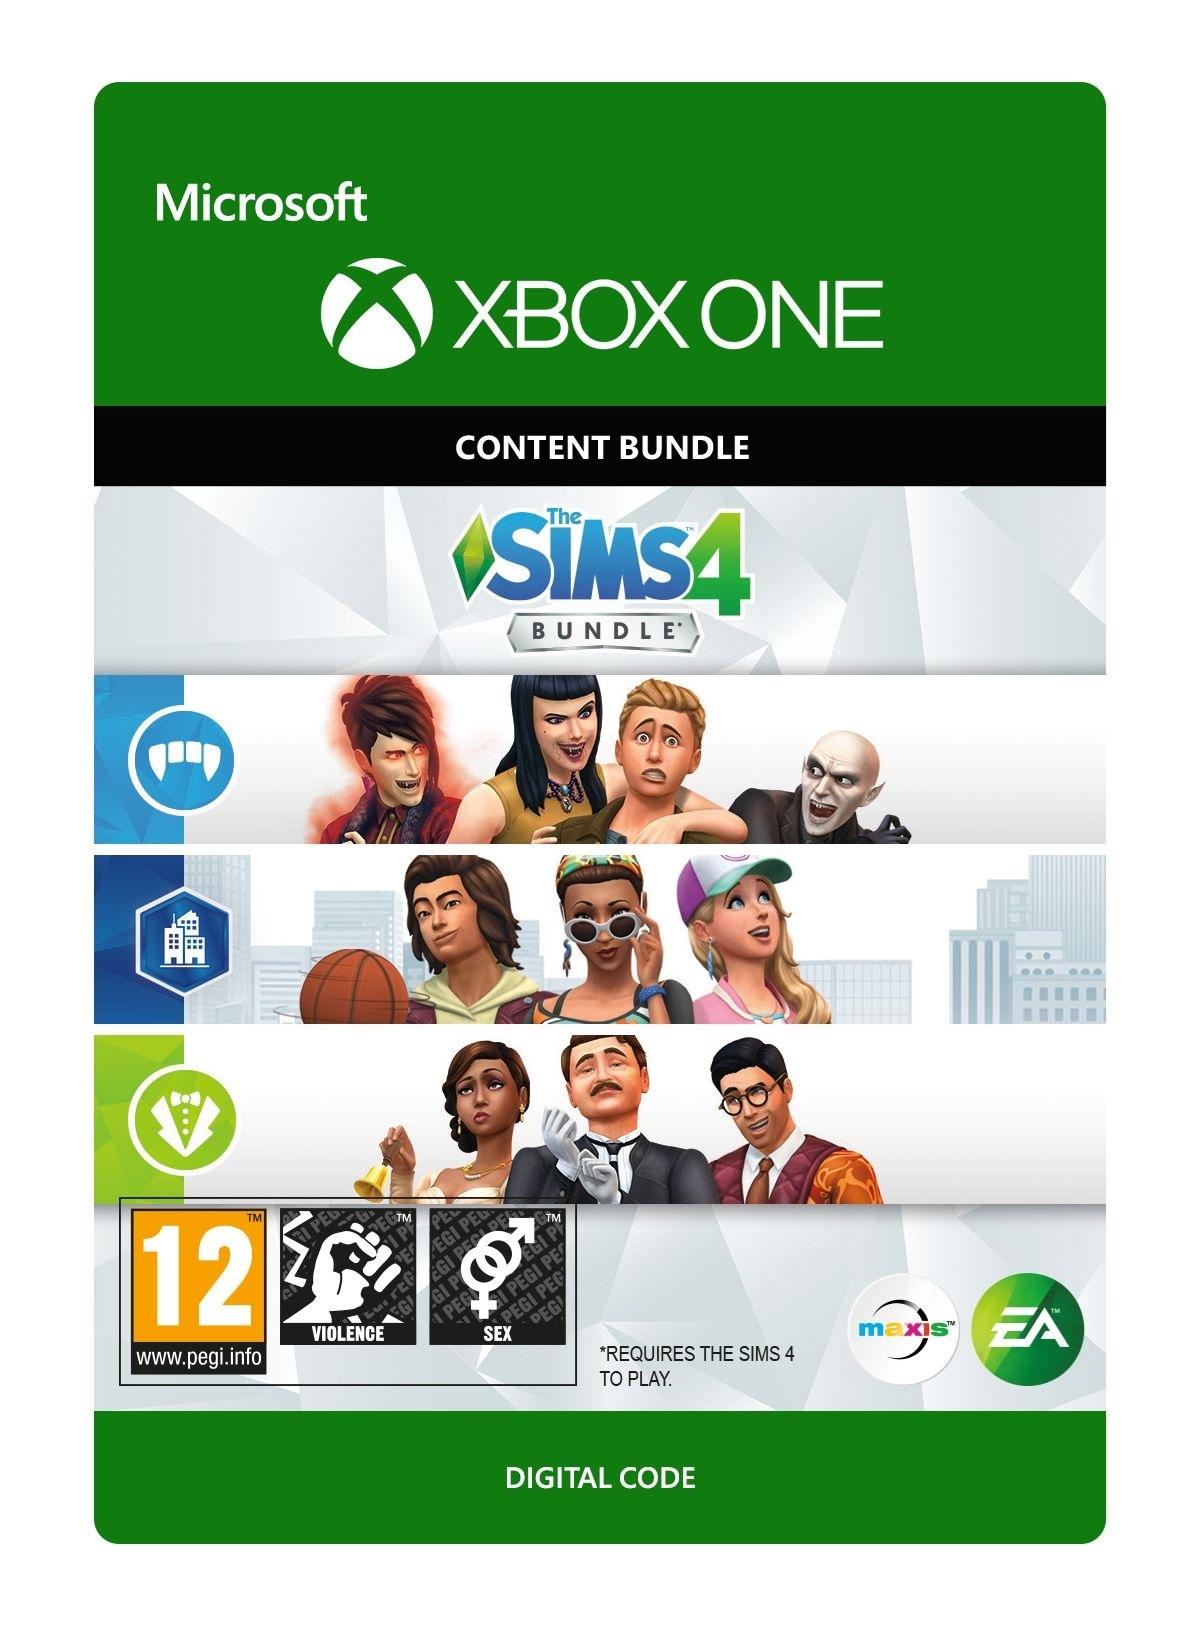 The Sims 4: Extra Content Starter Bundle - Xbox One - Content Bundle | 7D4-00246 (3a41bf02-daa1-48c6-a4c6-f2f2d830cade)